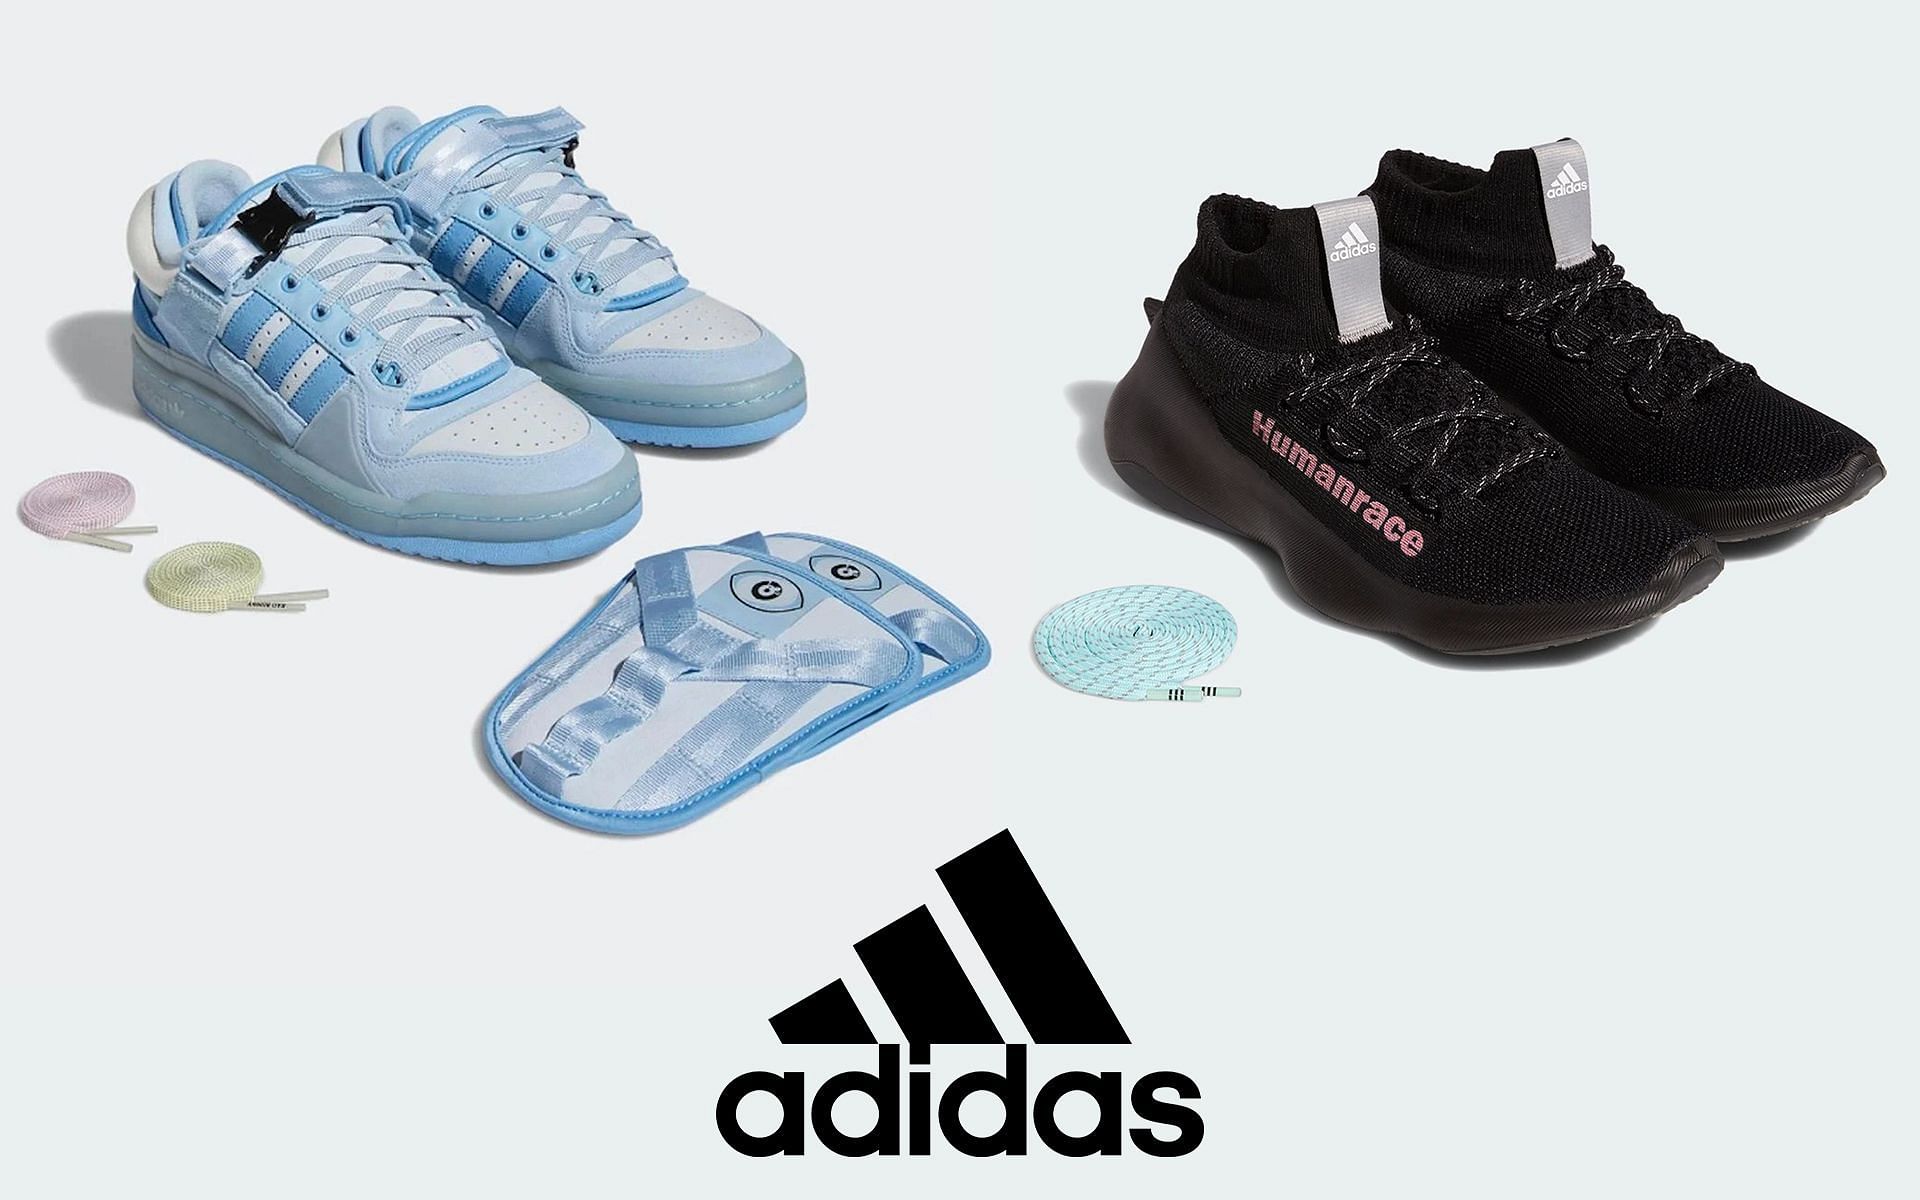 5 Adidas collabs in 2022